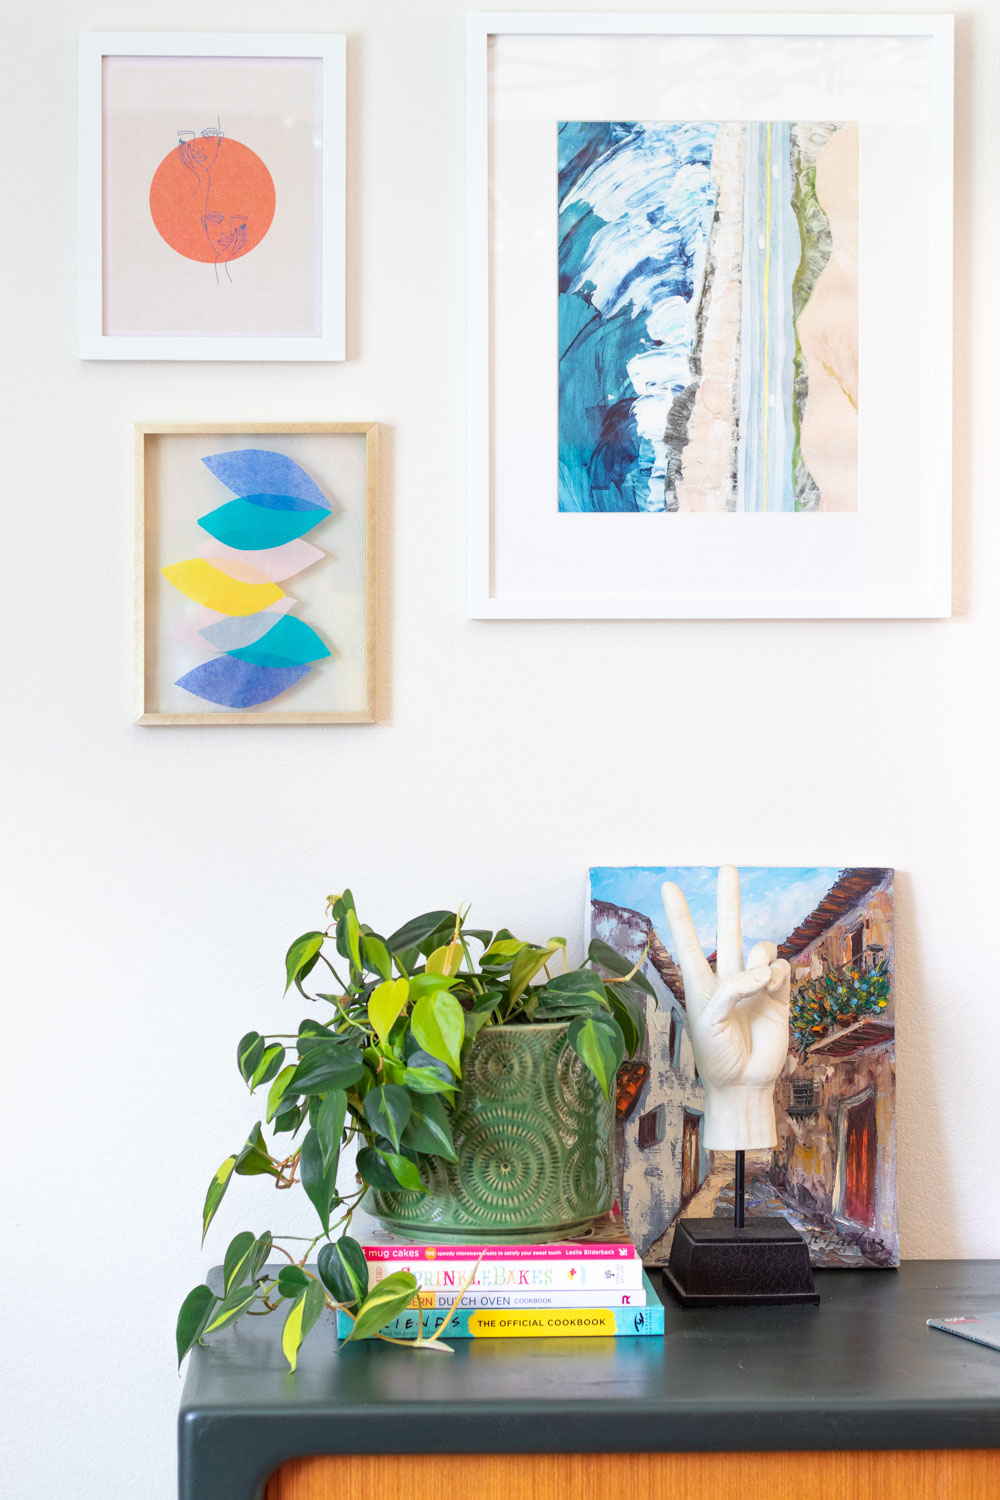 5 Minute Diy Wall Art With Tissue Paper Club Crafted